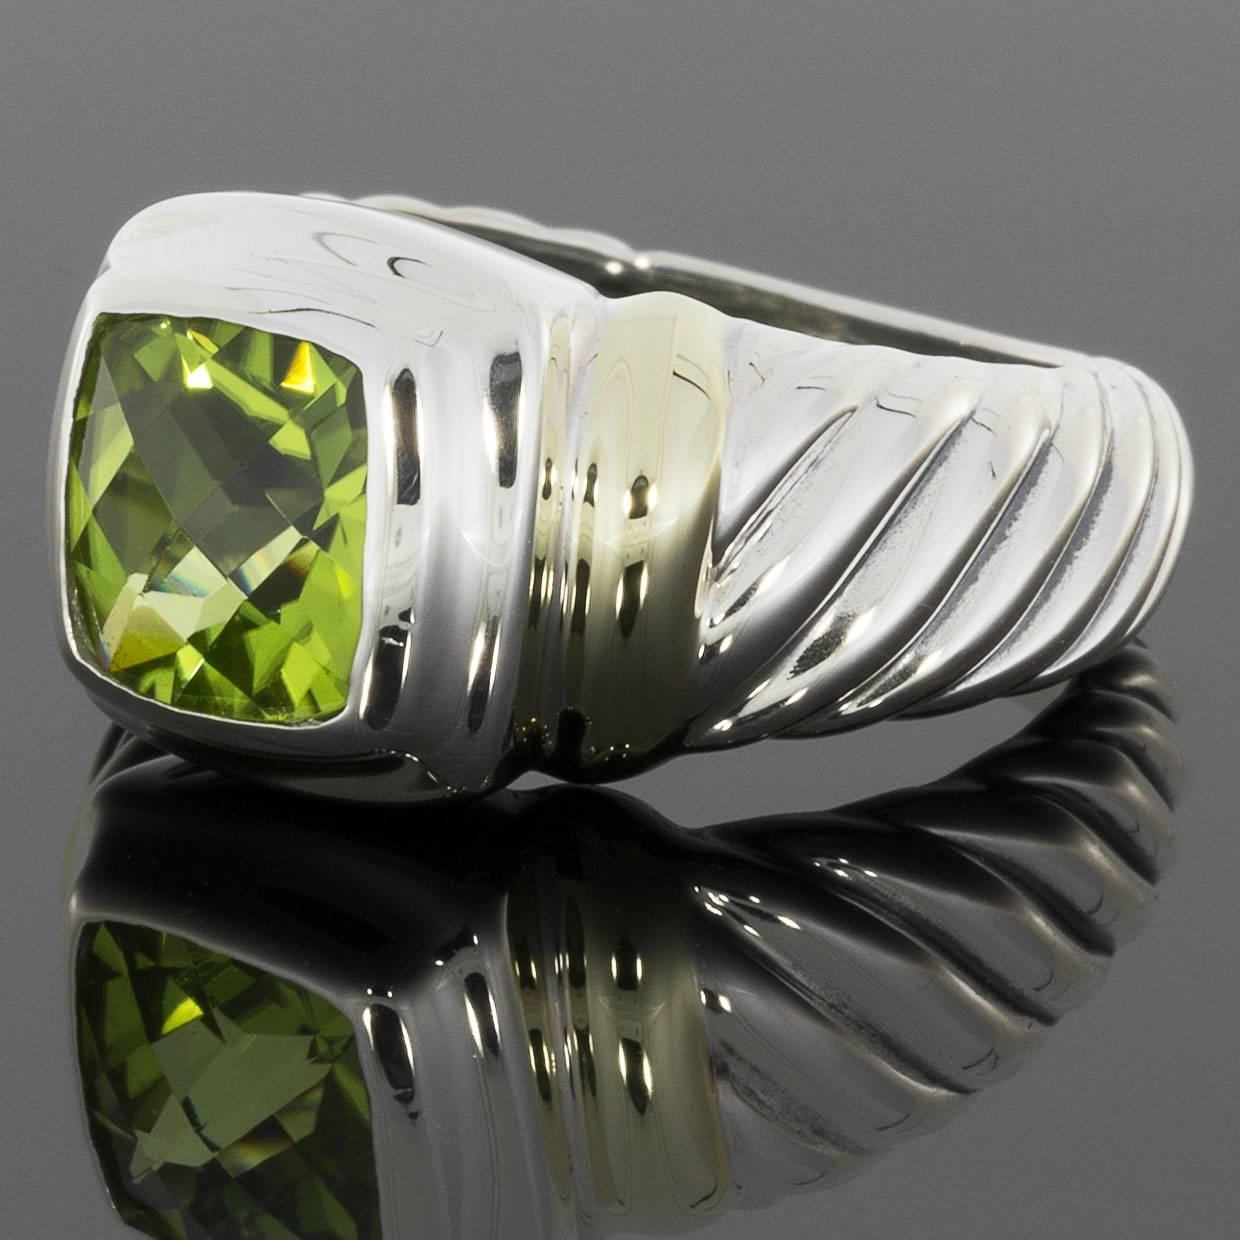 This beautiful David Yurman ring is from the Noblesse Collection. It features a square cushion cut peridot that is bezel set. The ring is comprised of sterling silver with 14 karat yellow gold accents. The shank features Yurman's signature cable